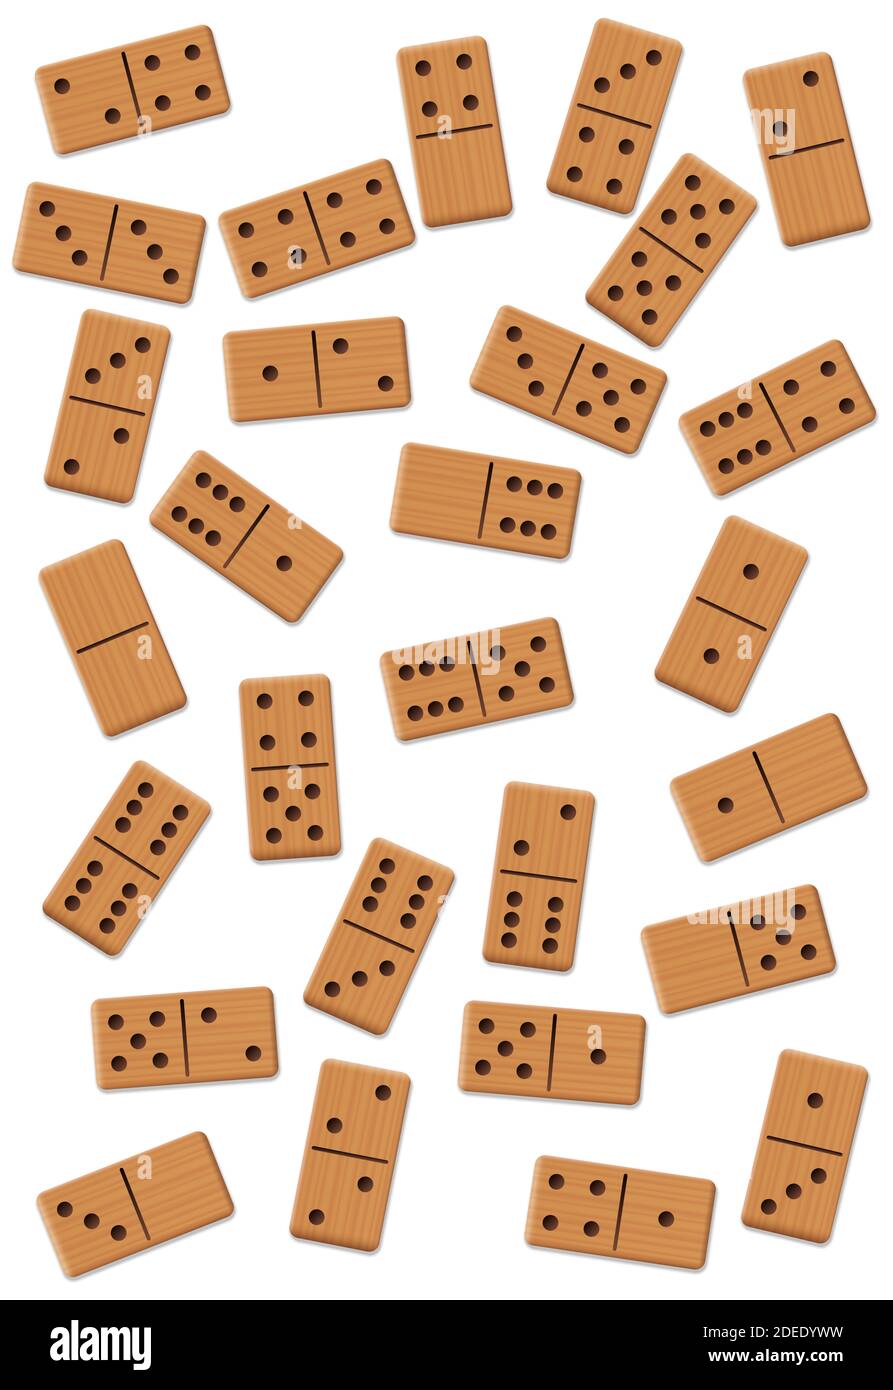 Dominos, scattered, shuffled, mixed up,loosely arranged messy set of 28 wooden tiles - illustration on white background. Stock Photo